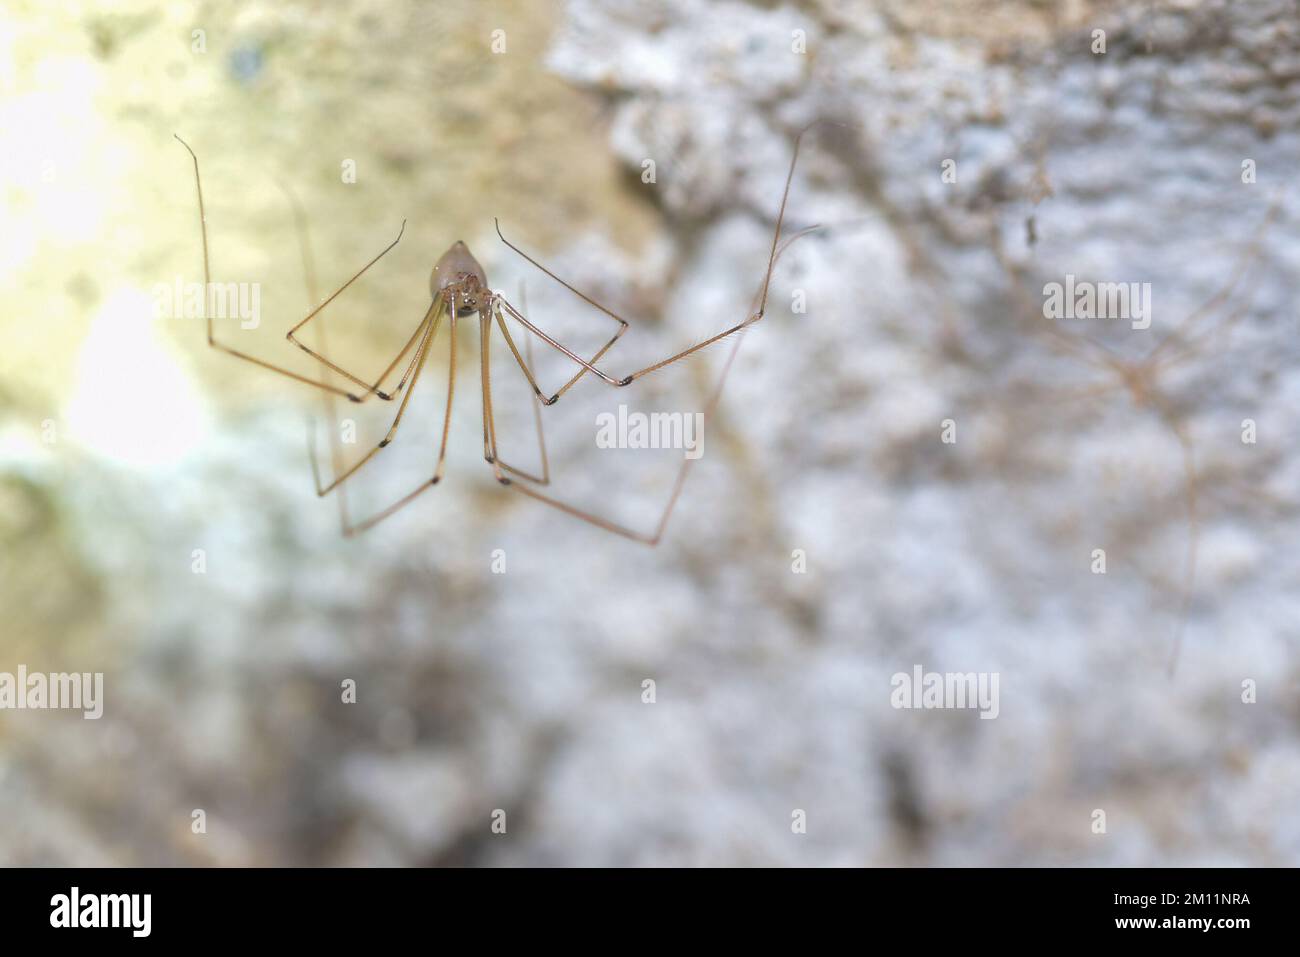 long-legged cellar spider (Pholcus phalangioides) sitting in the basement of a residential building, Germany Stock Photo